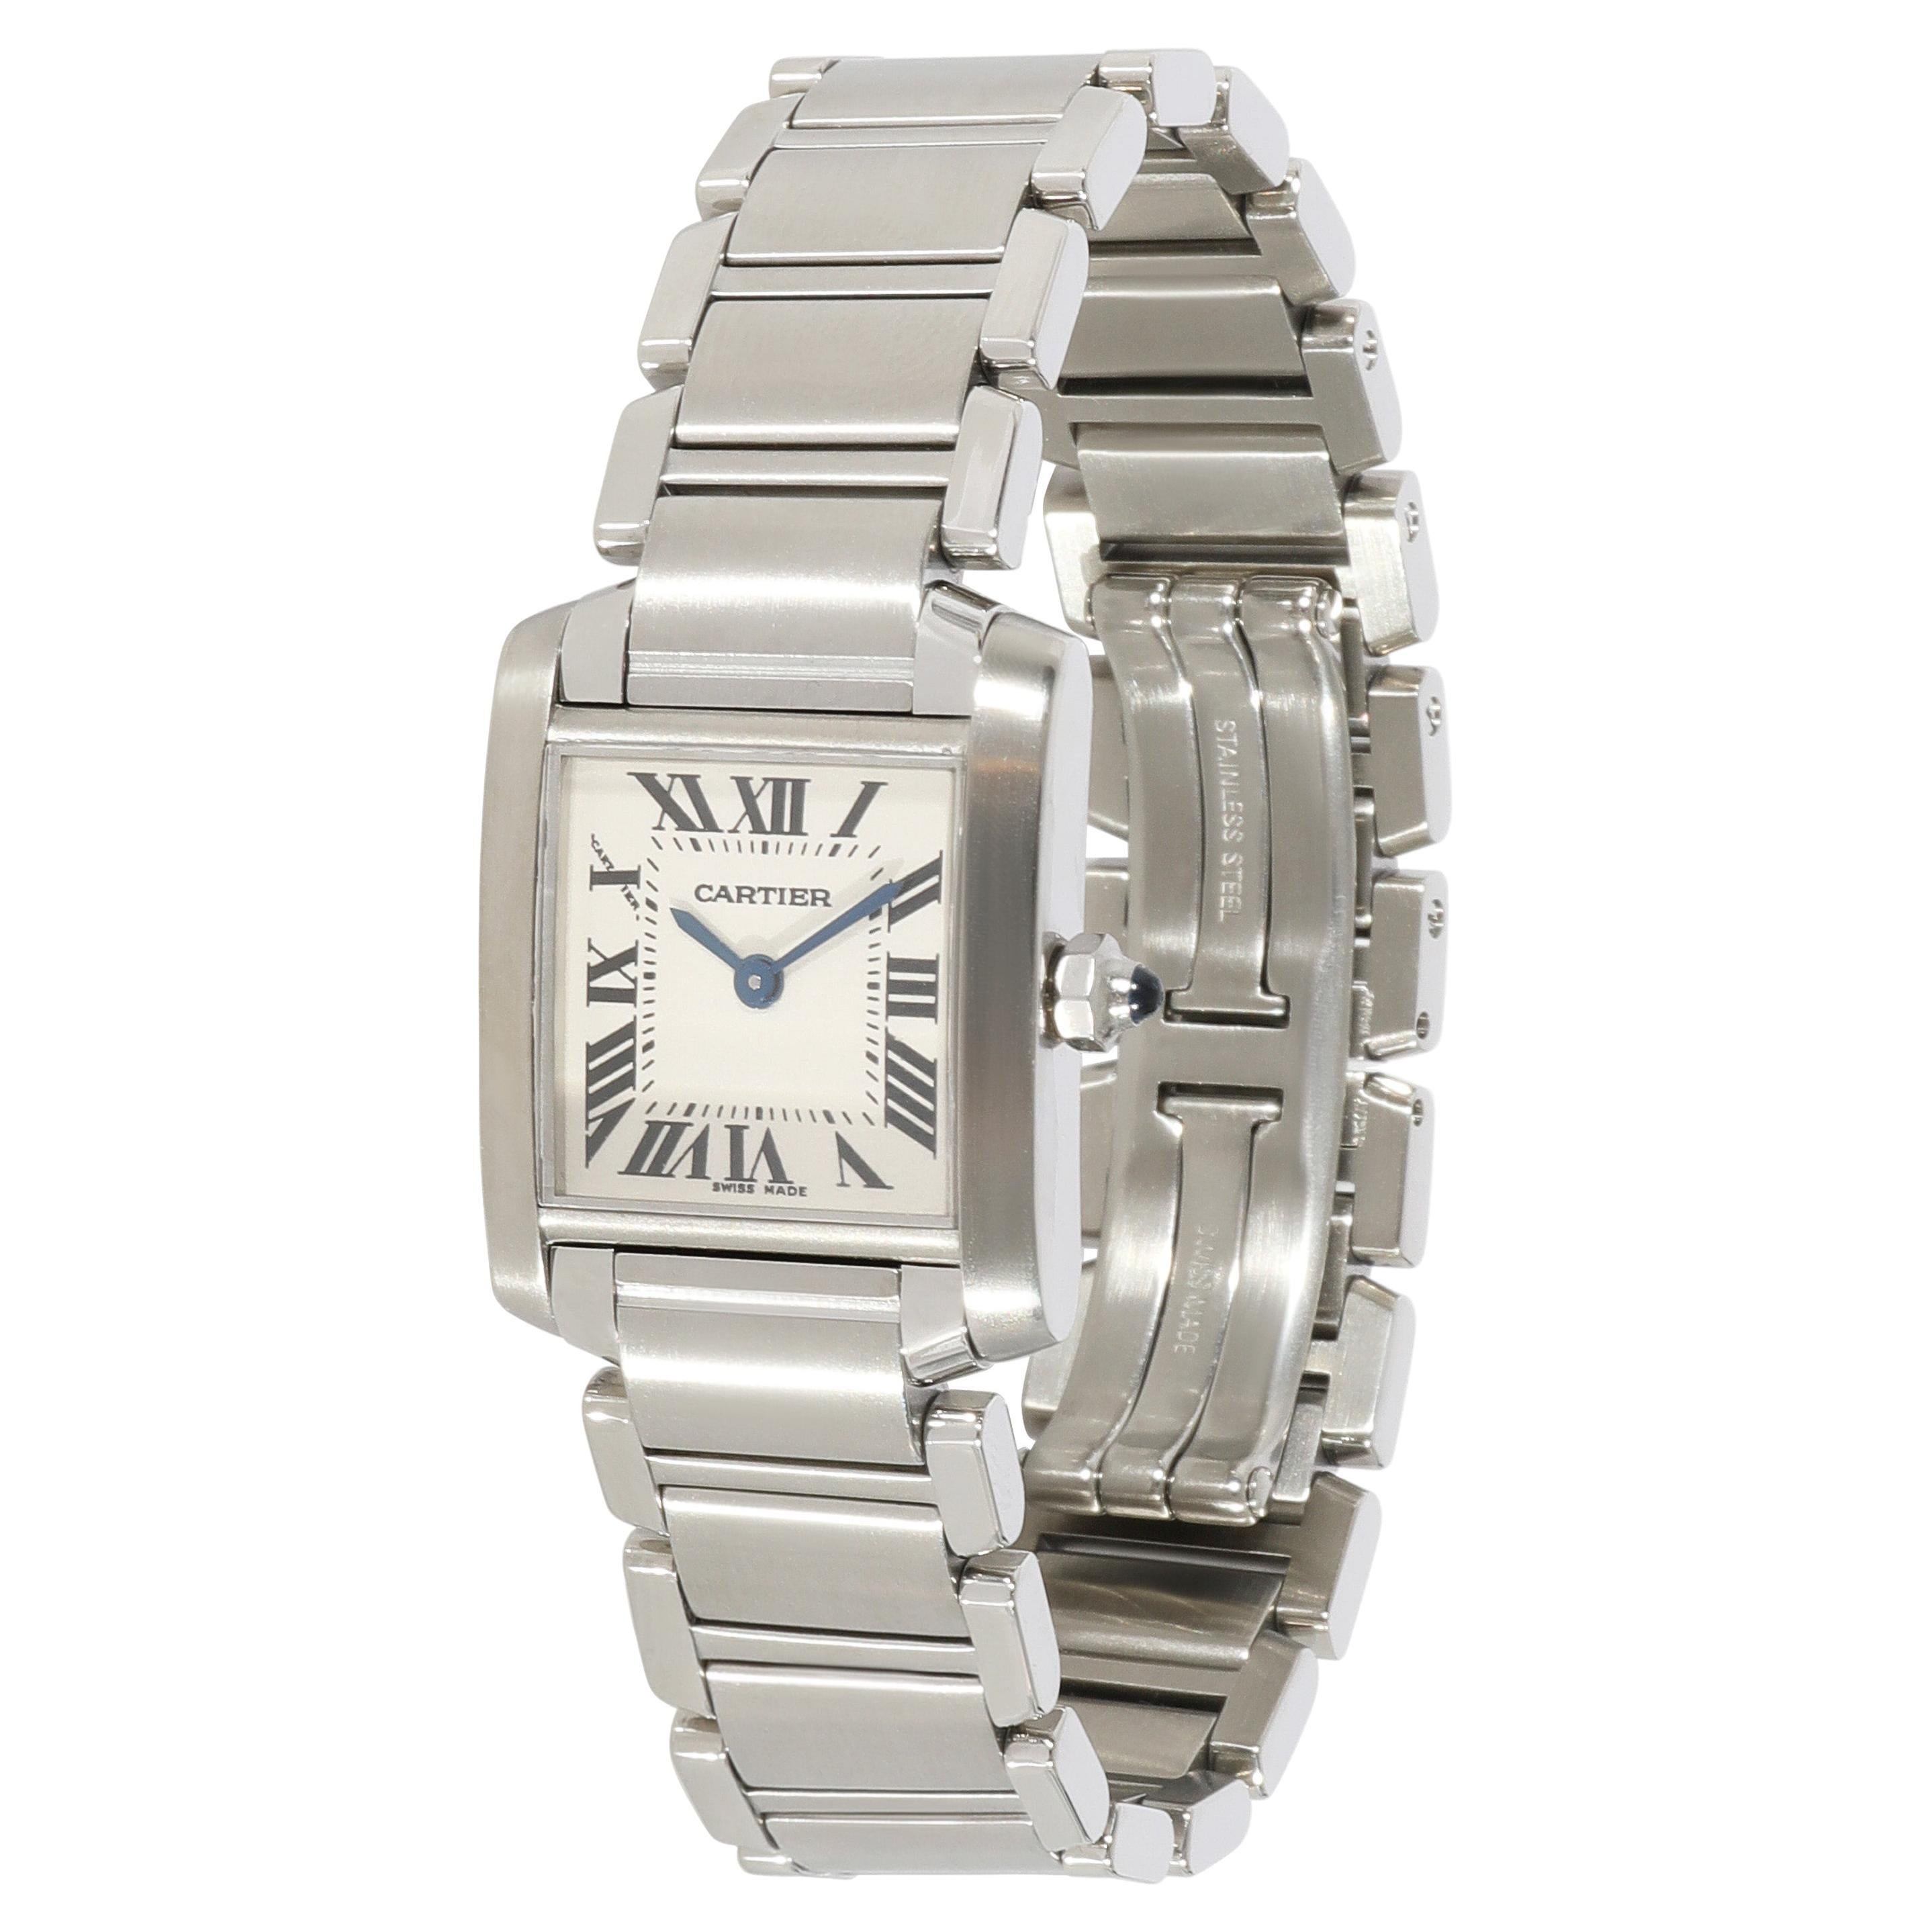 Cartier Tank Francaise W51008Q3 Women's Watch in Stainless Steel